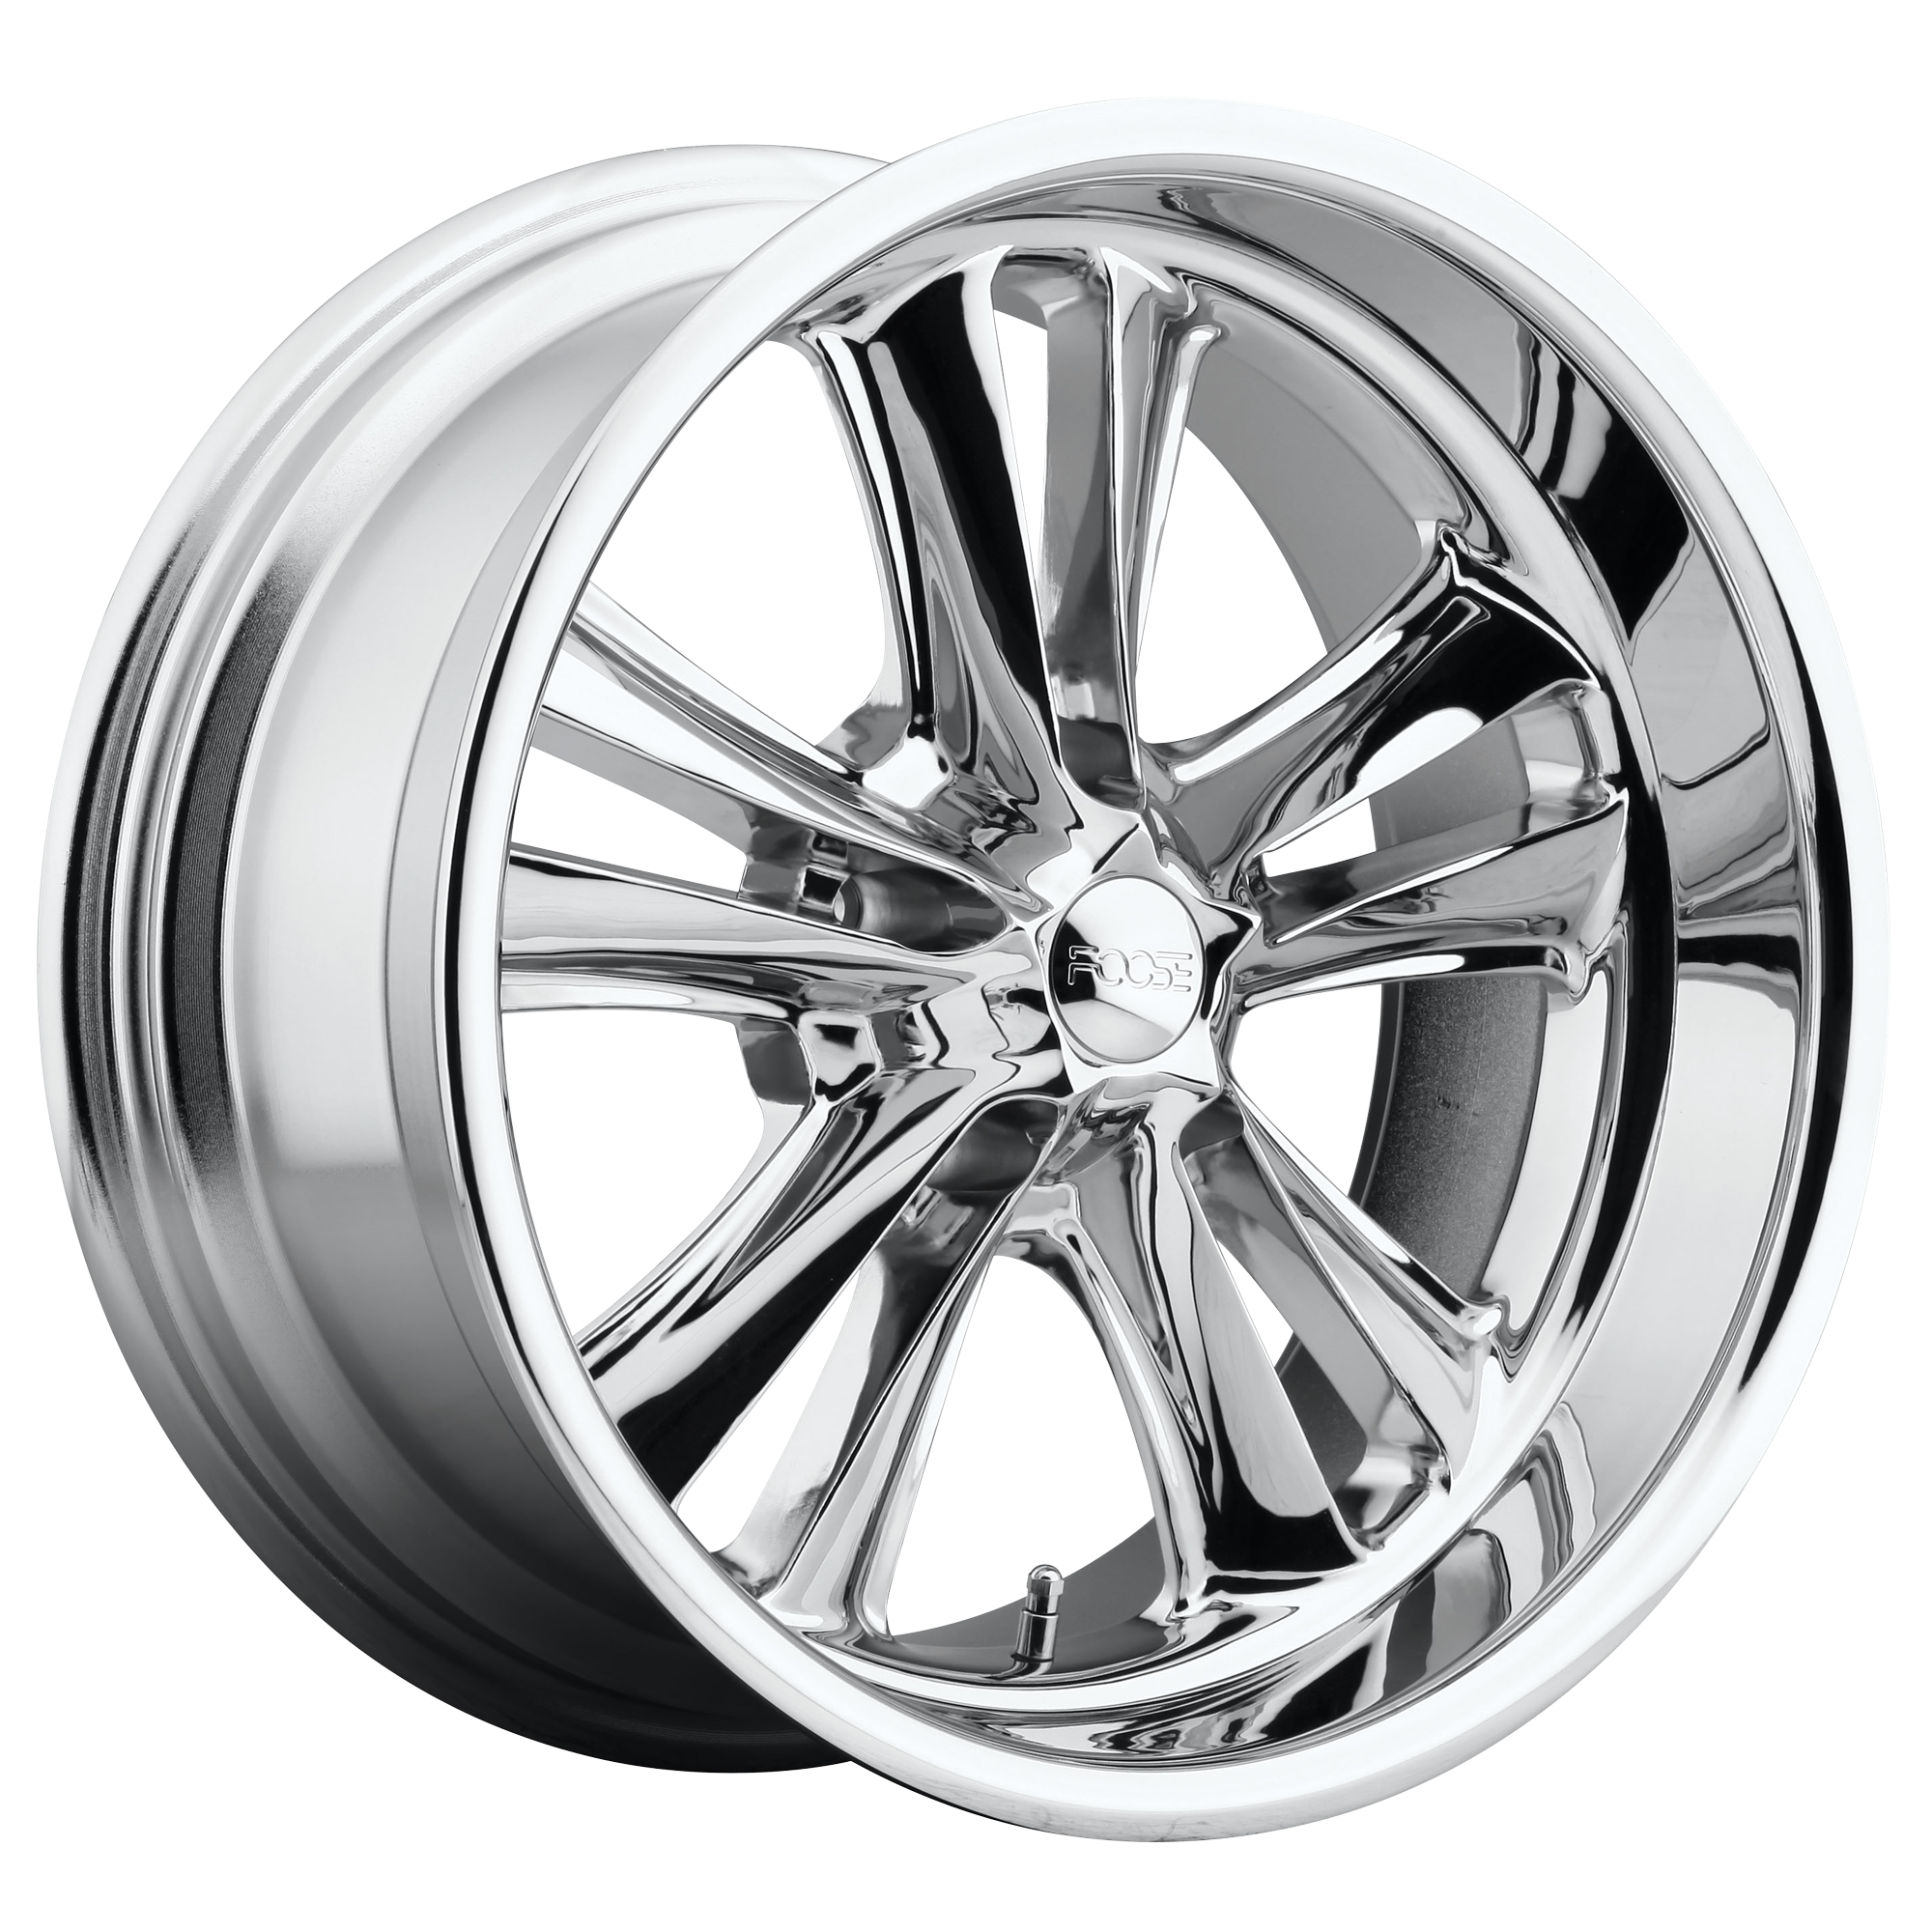 KNUCKLE 17x8 5x114.30 CHROME PLATED (1 mm) - Tires and Engine Performance